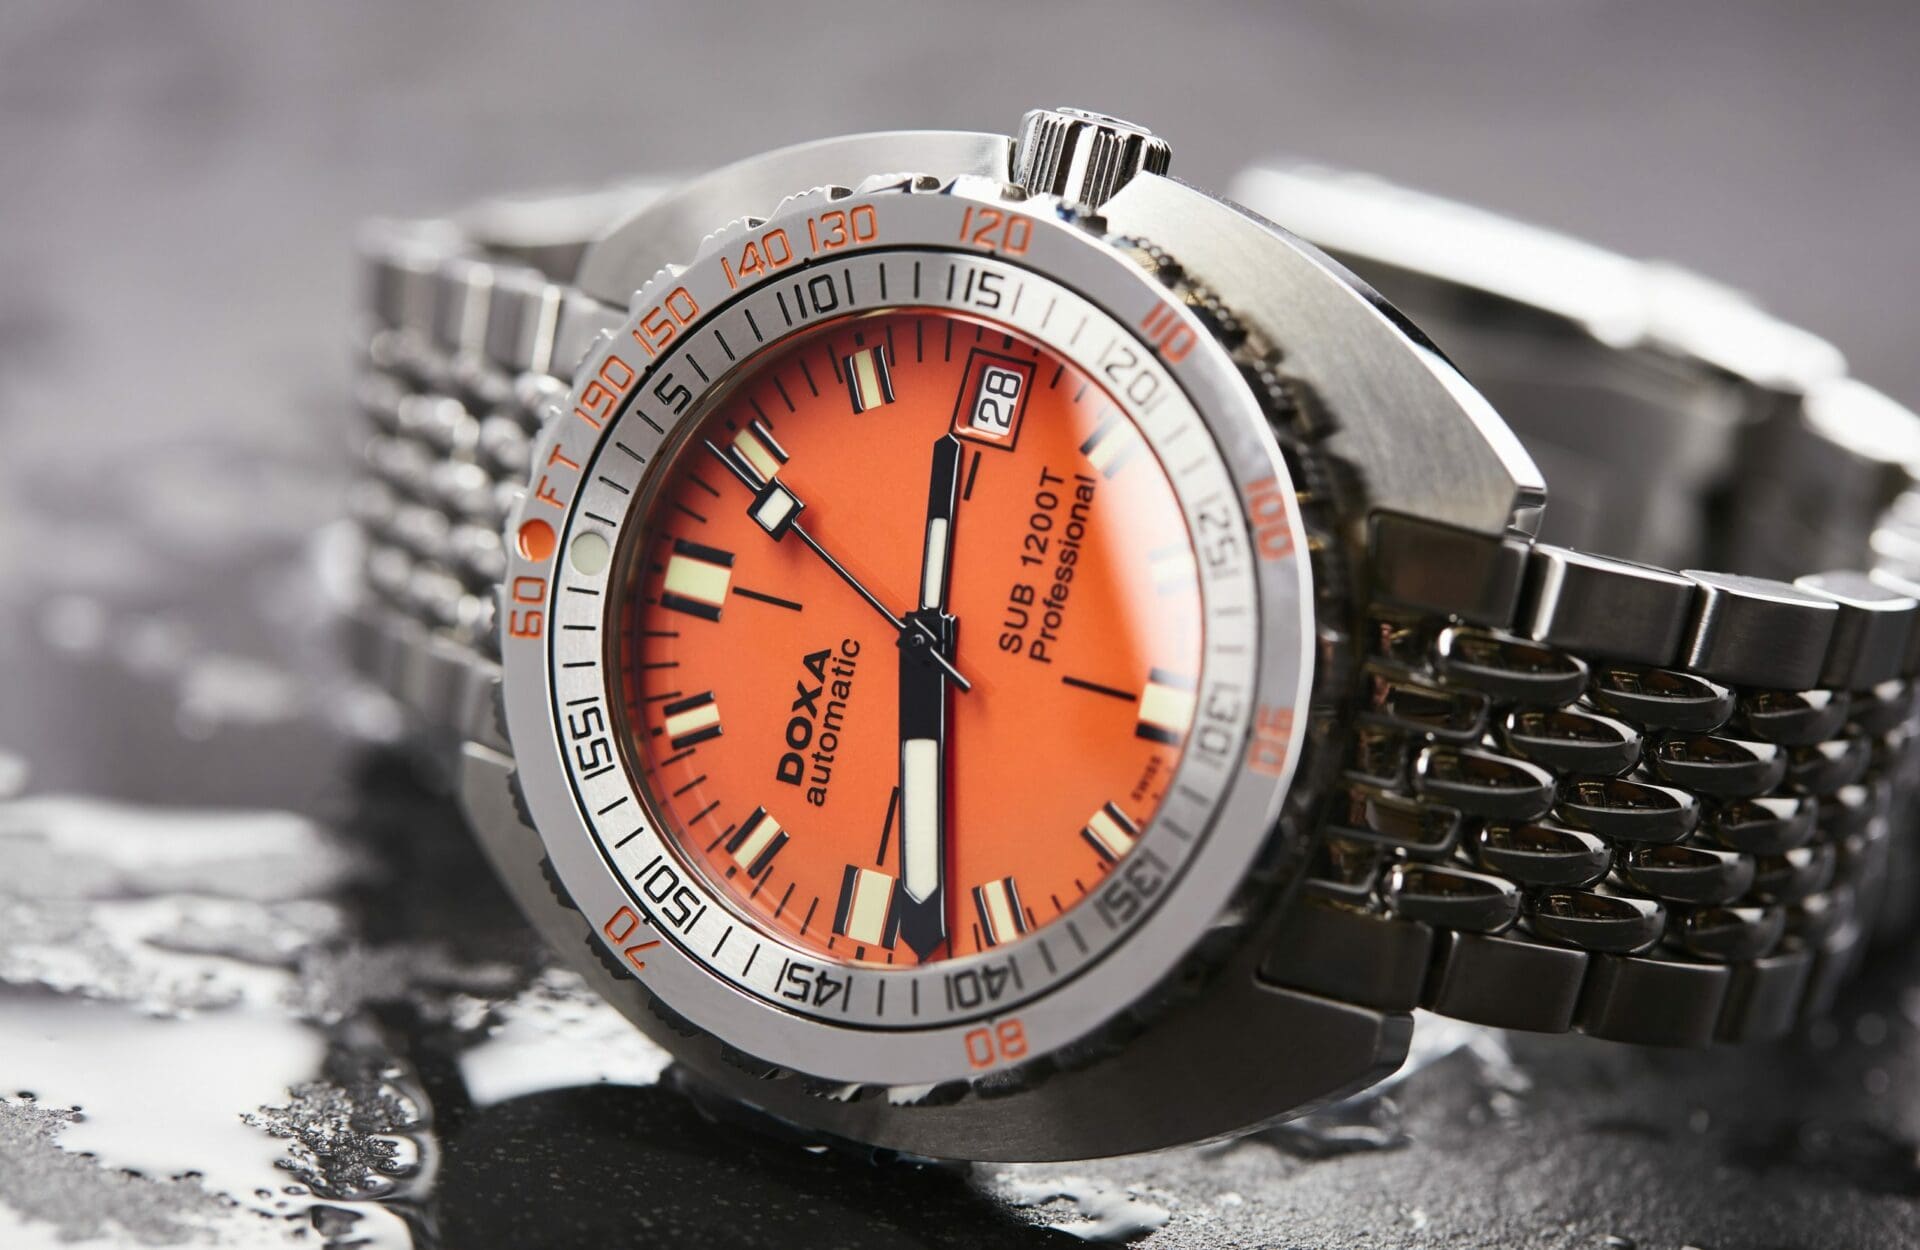 EVERY WATCH TELLS A STORY: Andrew’s DOXA SUB 1200T and the William Wood Valiant Red Watch face off on each wrist